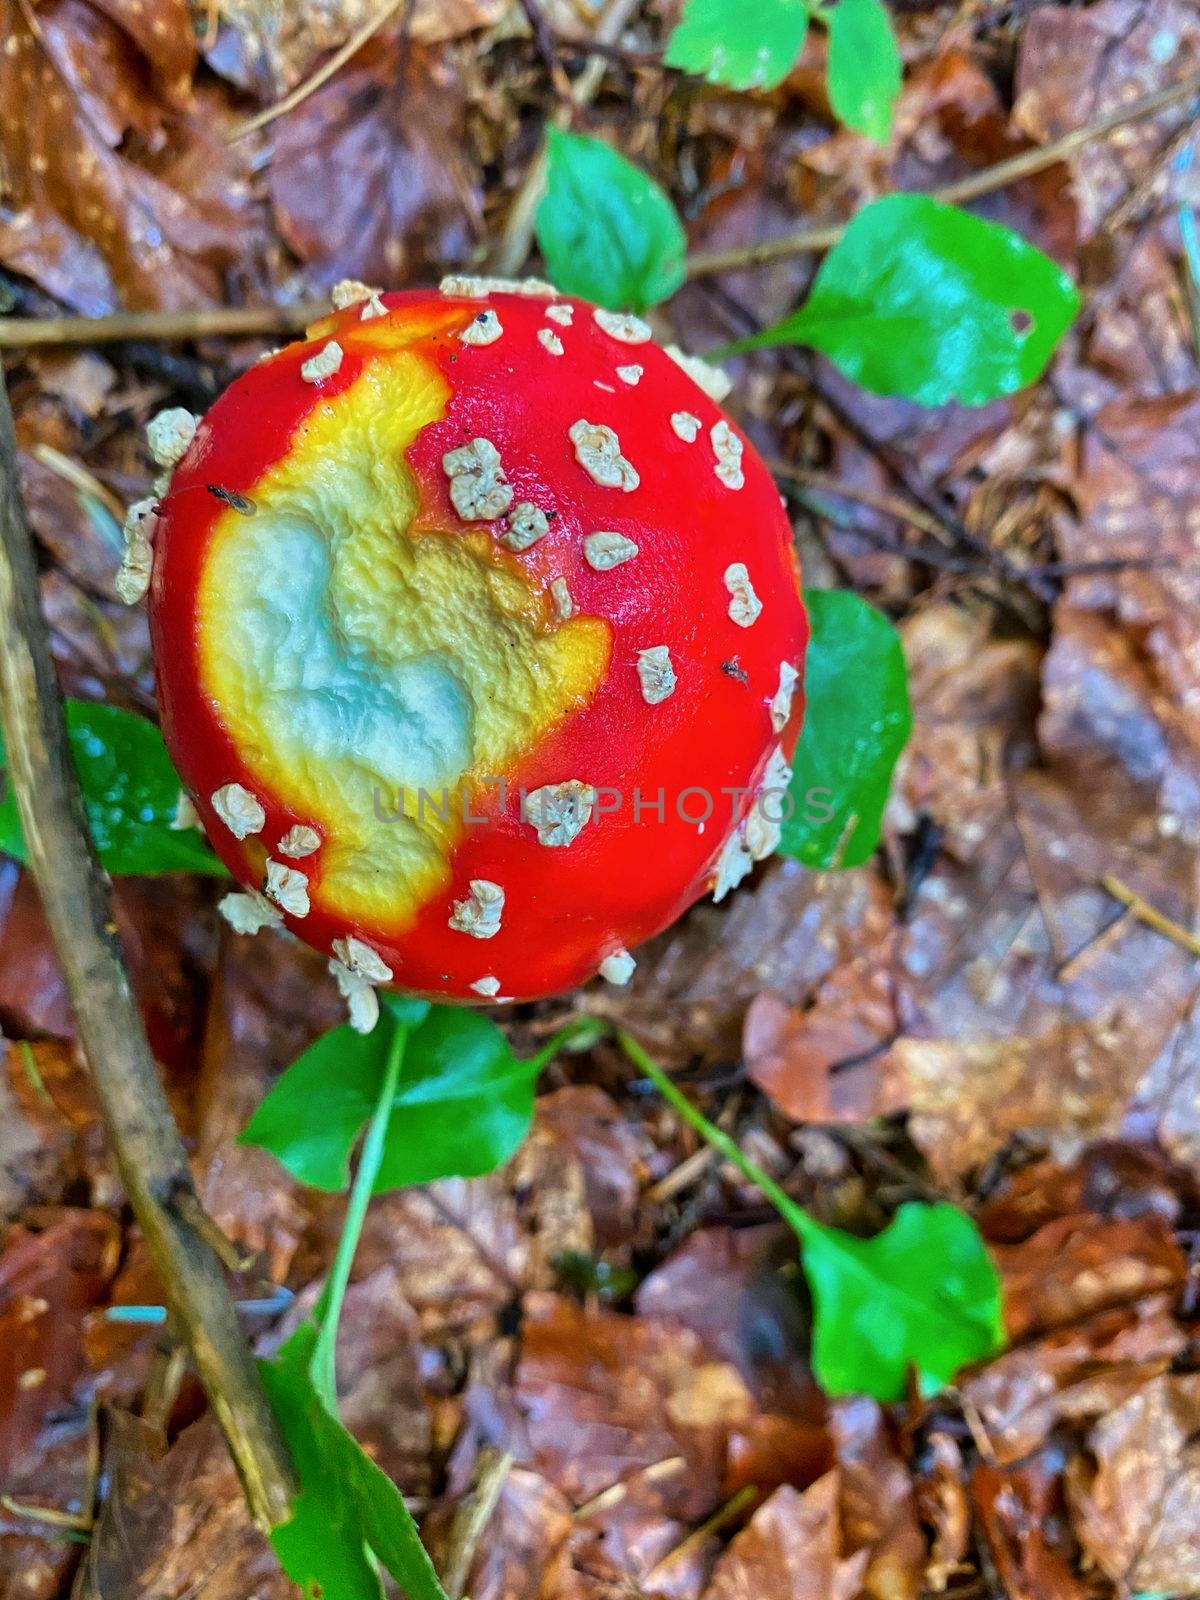 Red poisonous mushrooms in a beautiful forest.